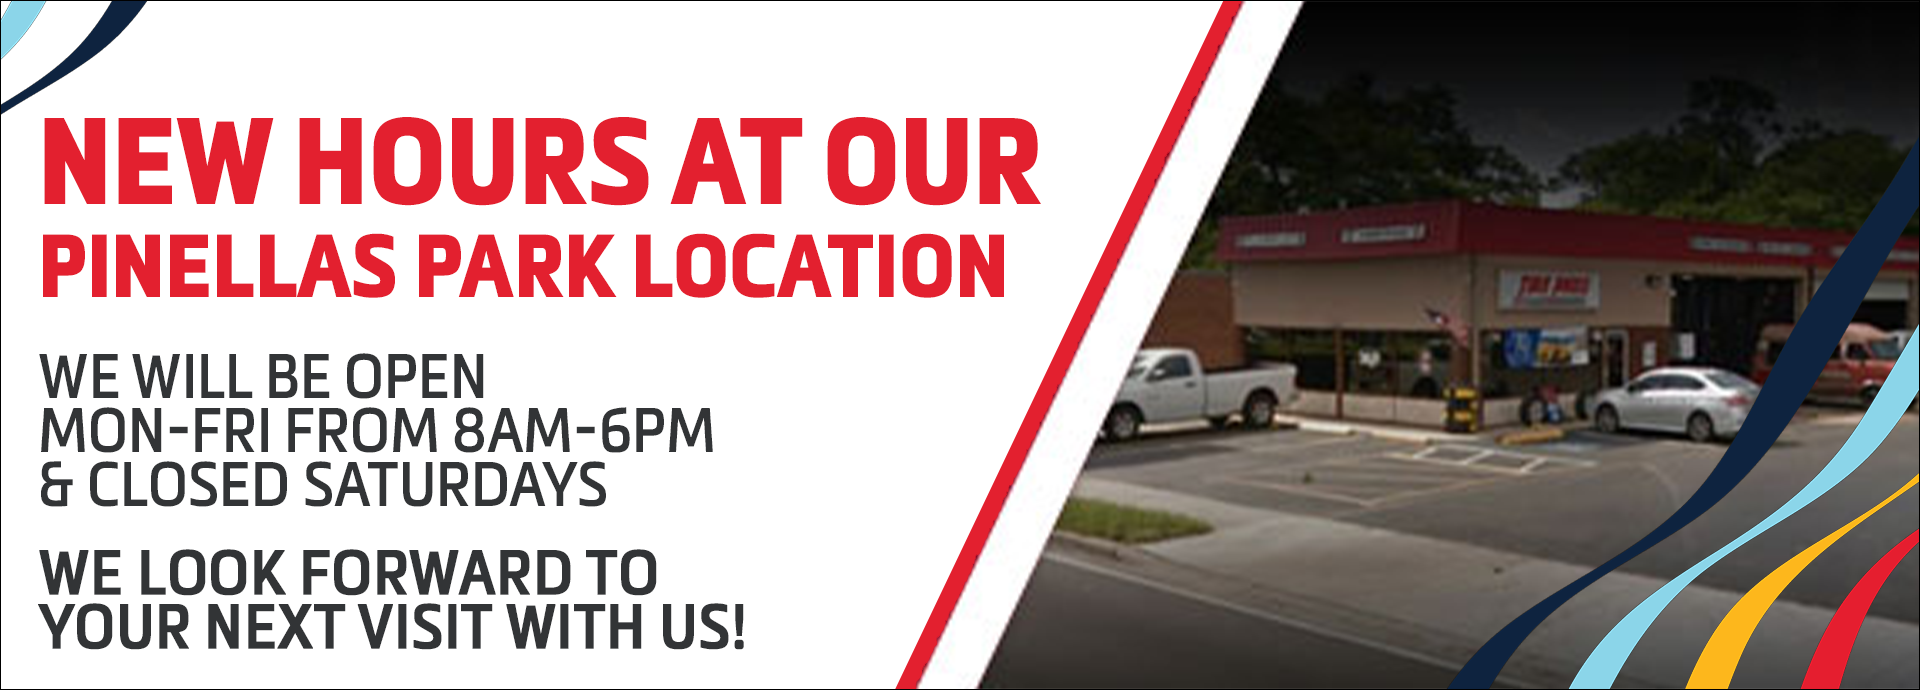 New Hours At Our Pinellas Park Location 